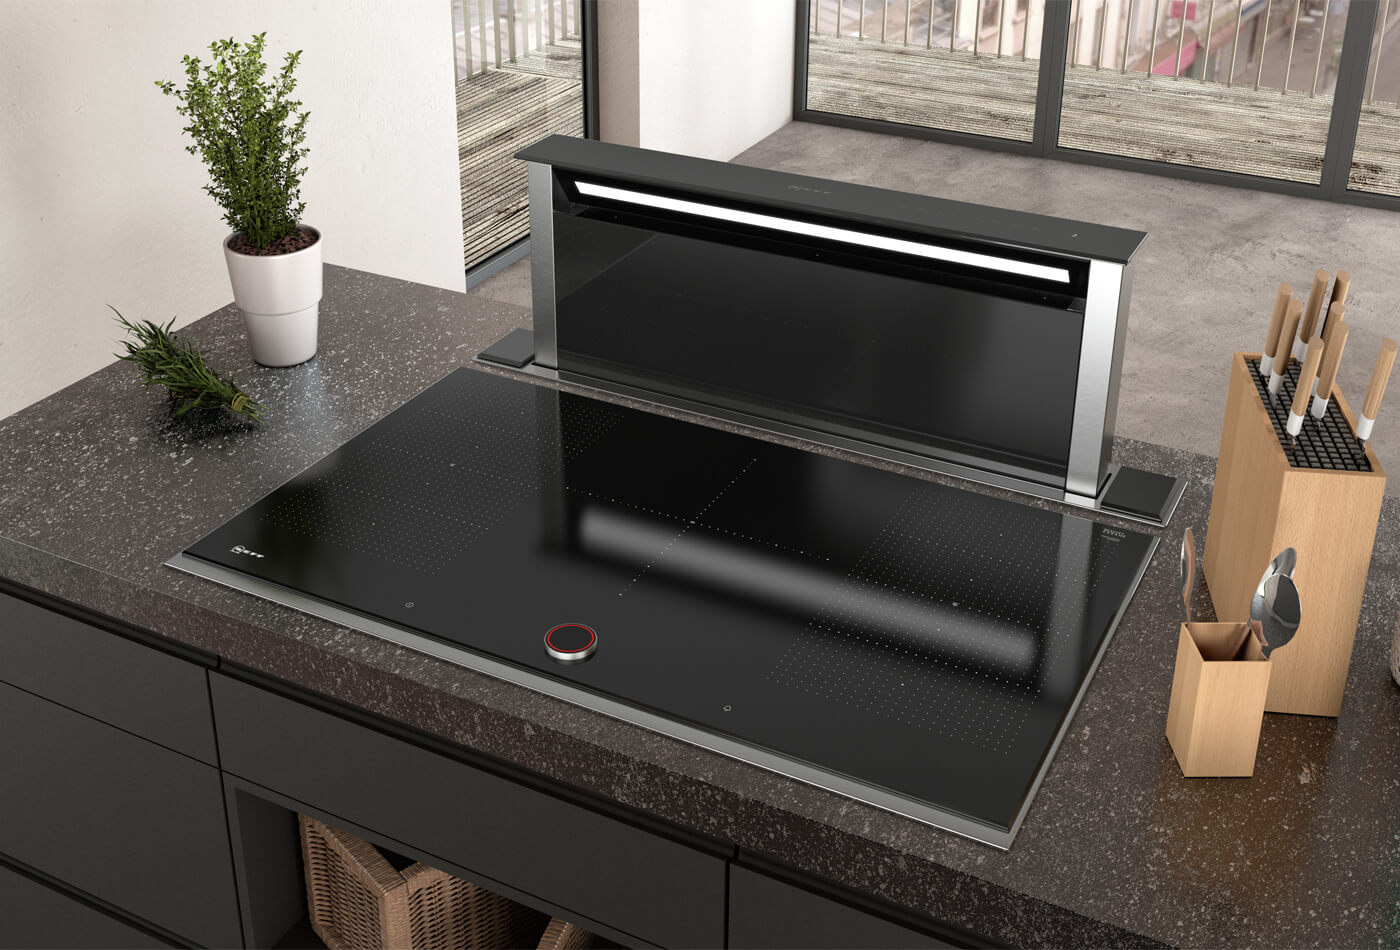 Stylish And Discreet Worktop Downdraft Extractor